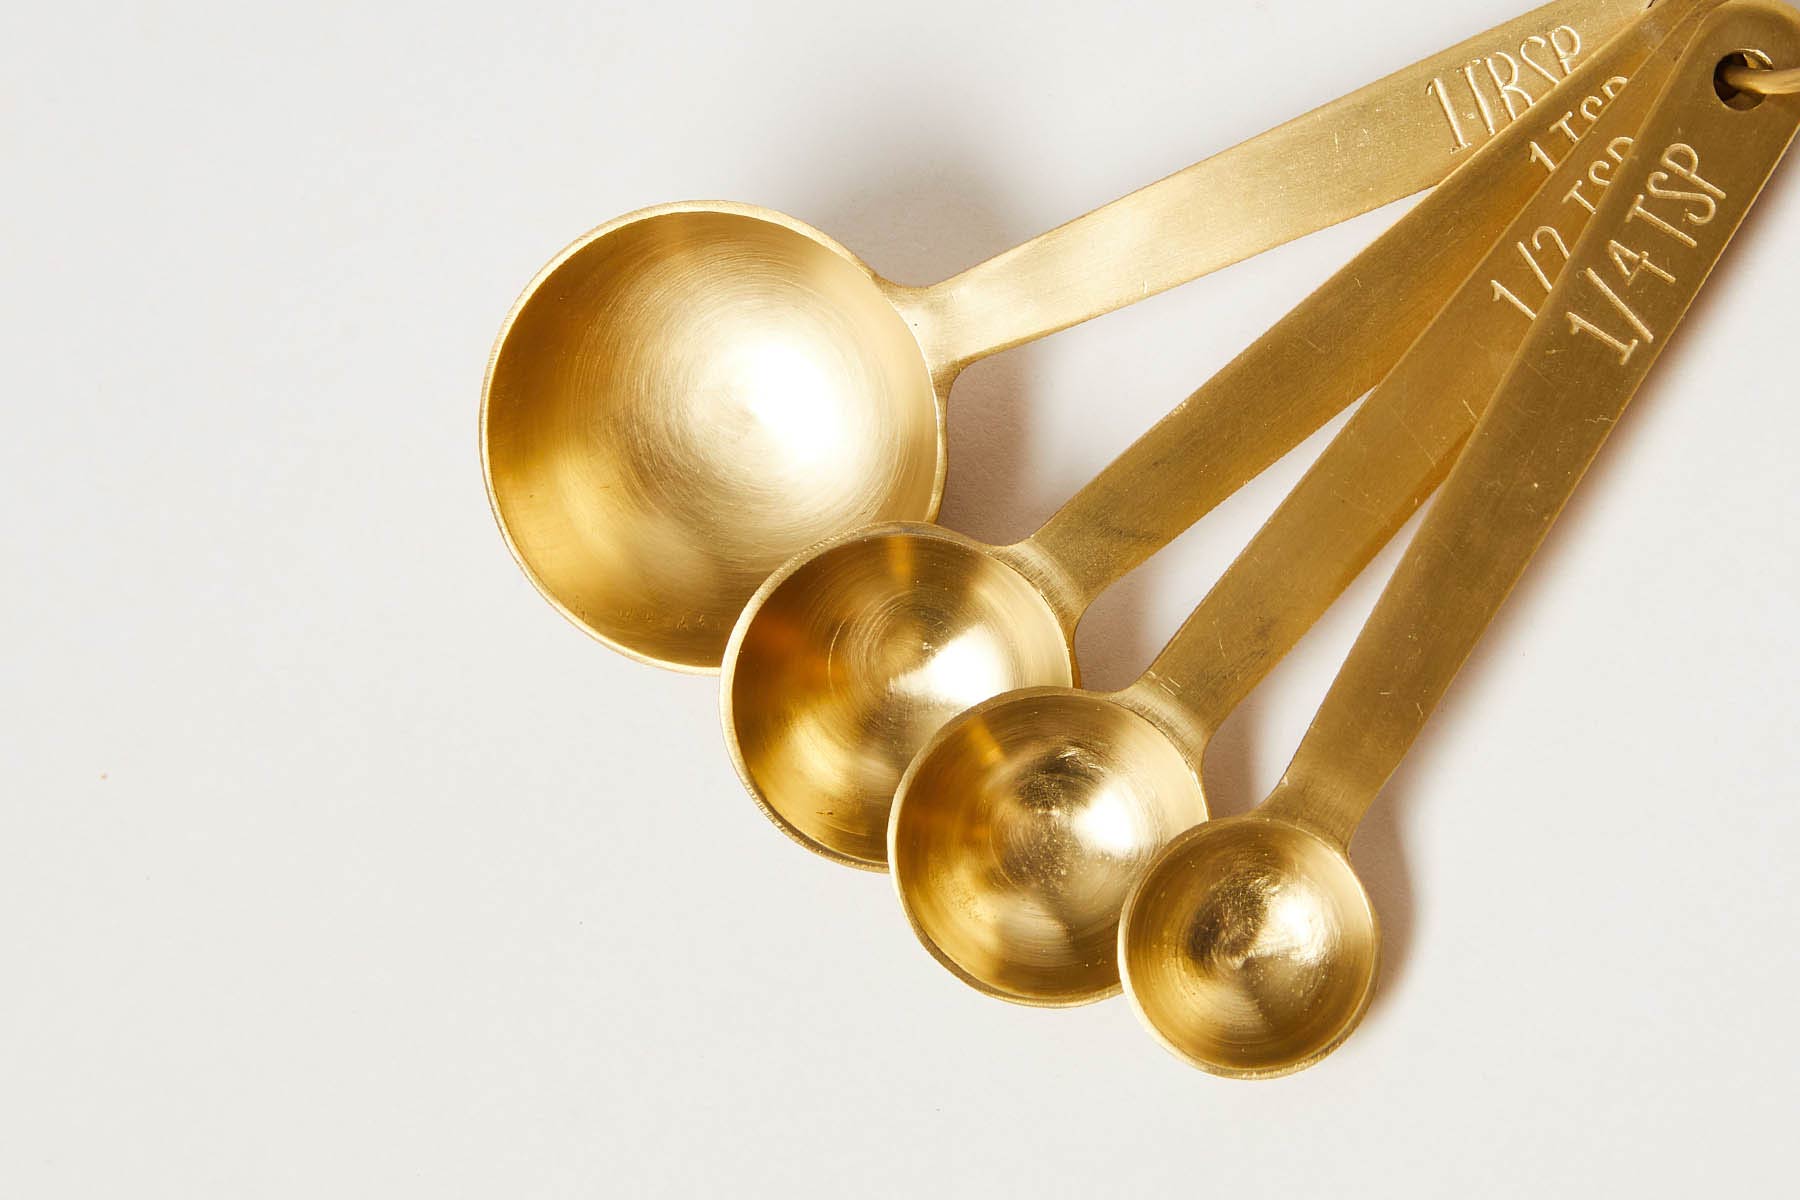 Stowe Measuring Cups - Brushed Gold Color: Brushed Gold